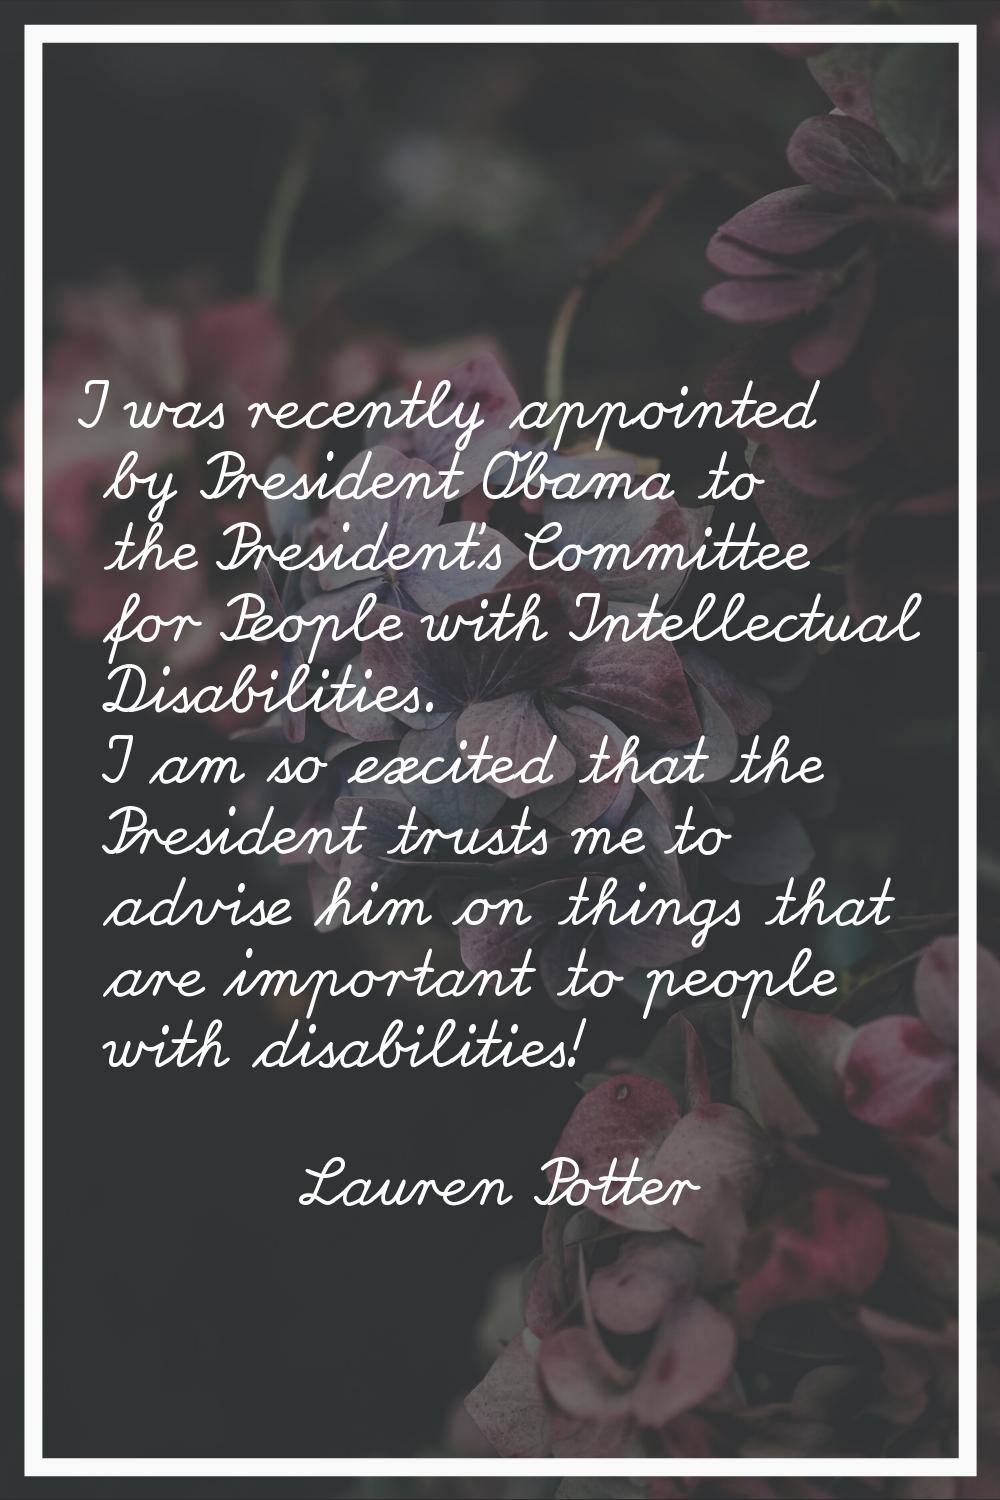 I was recently appointed by President Obama to the President's Committee for People with Intellectu